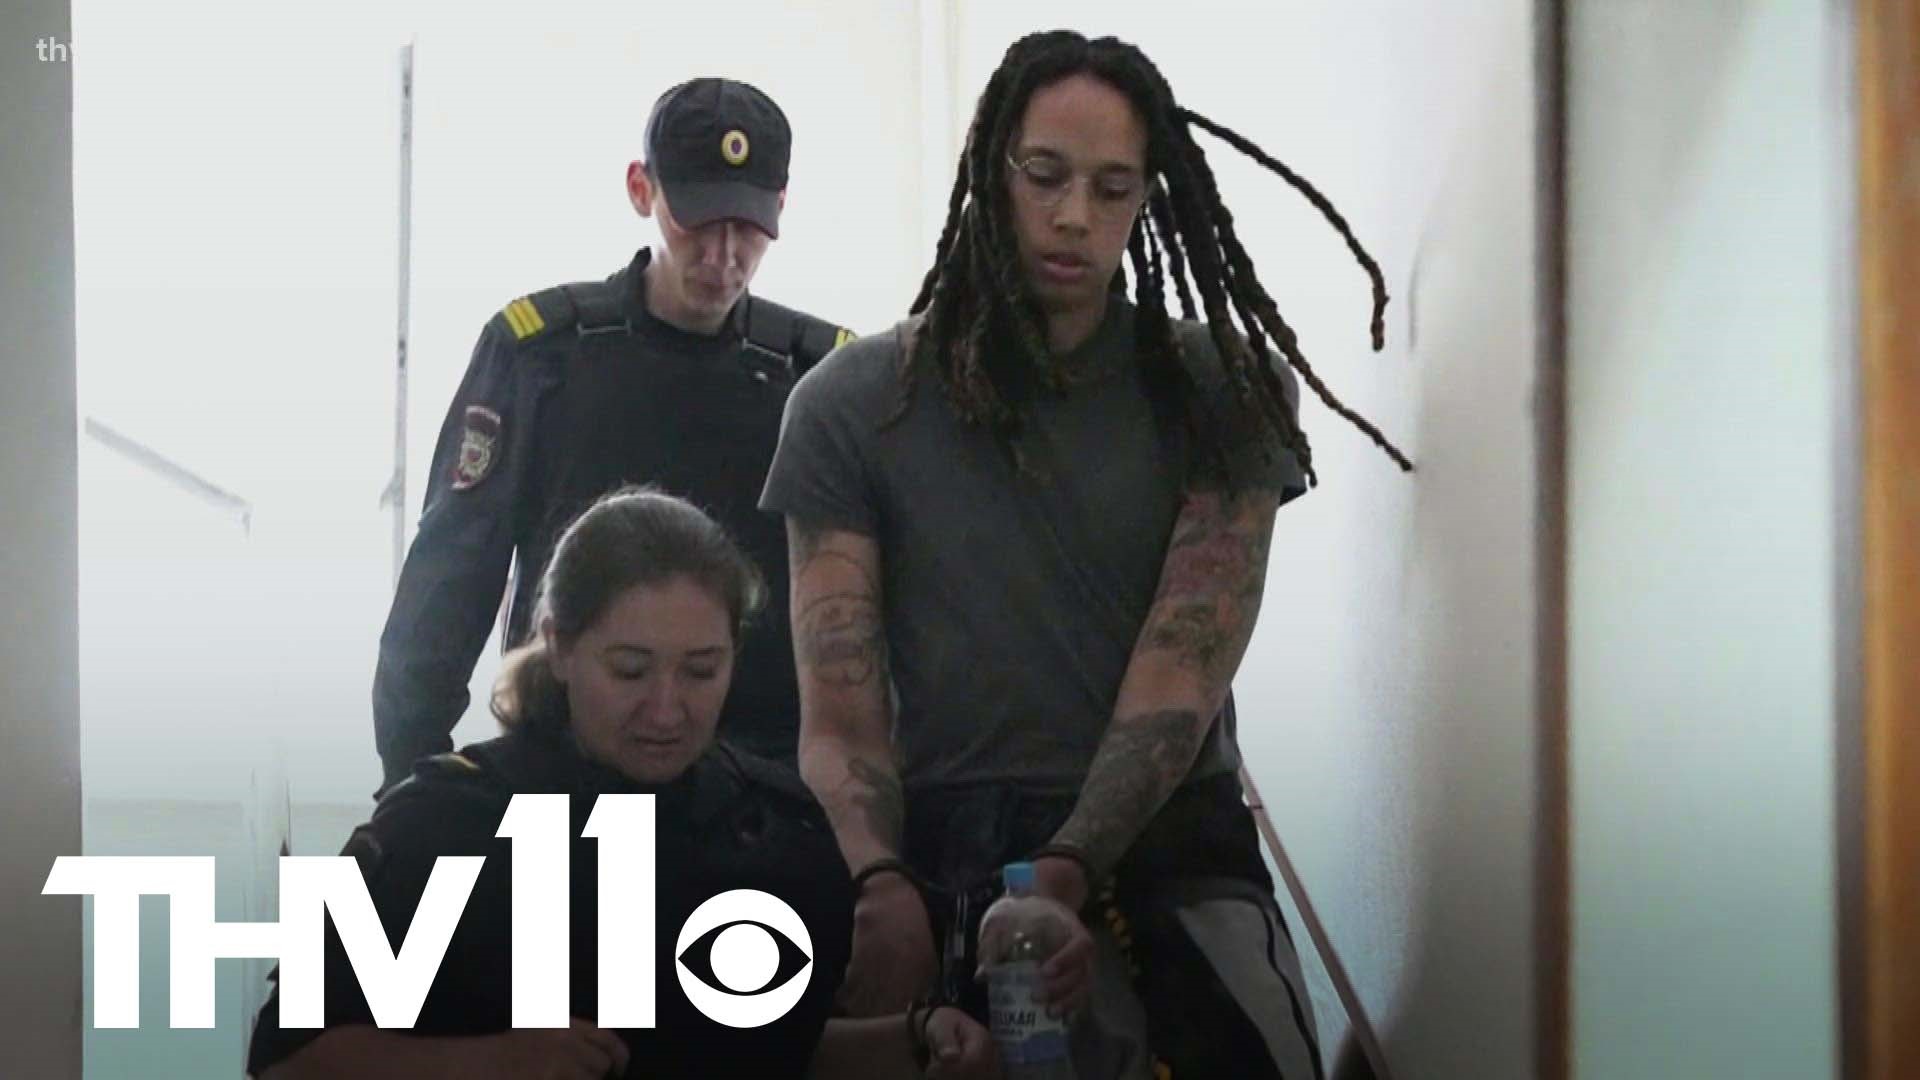 A judge in Russia has convicted and sentenced American basketball star Brittney Griner to nine years in prison for drug possession and smuggling.